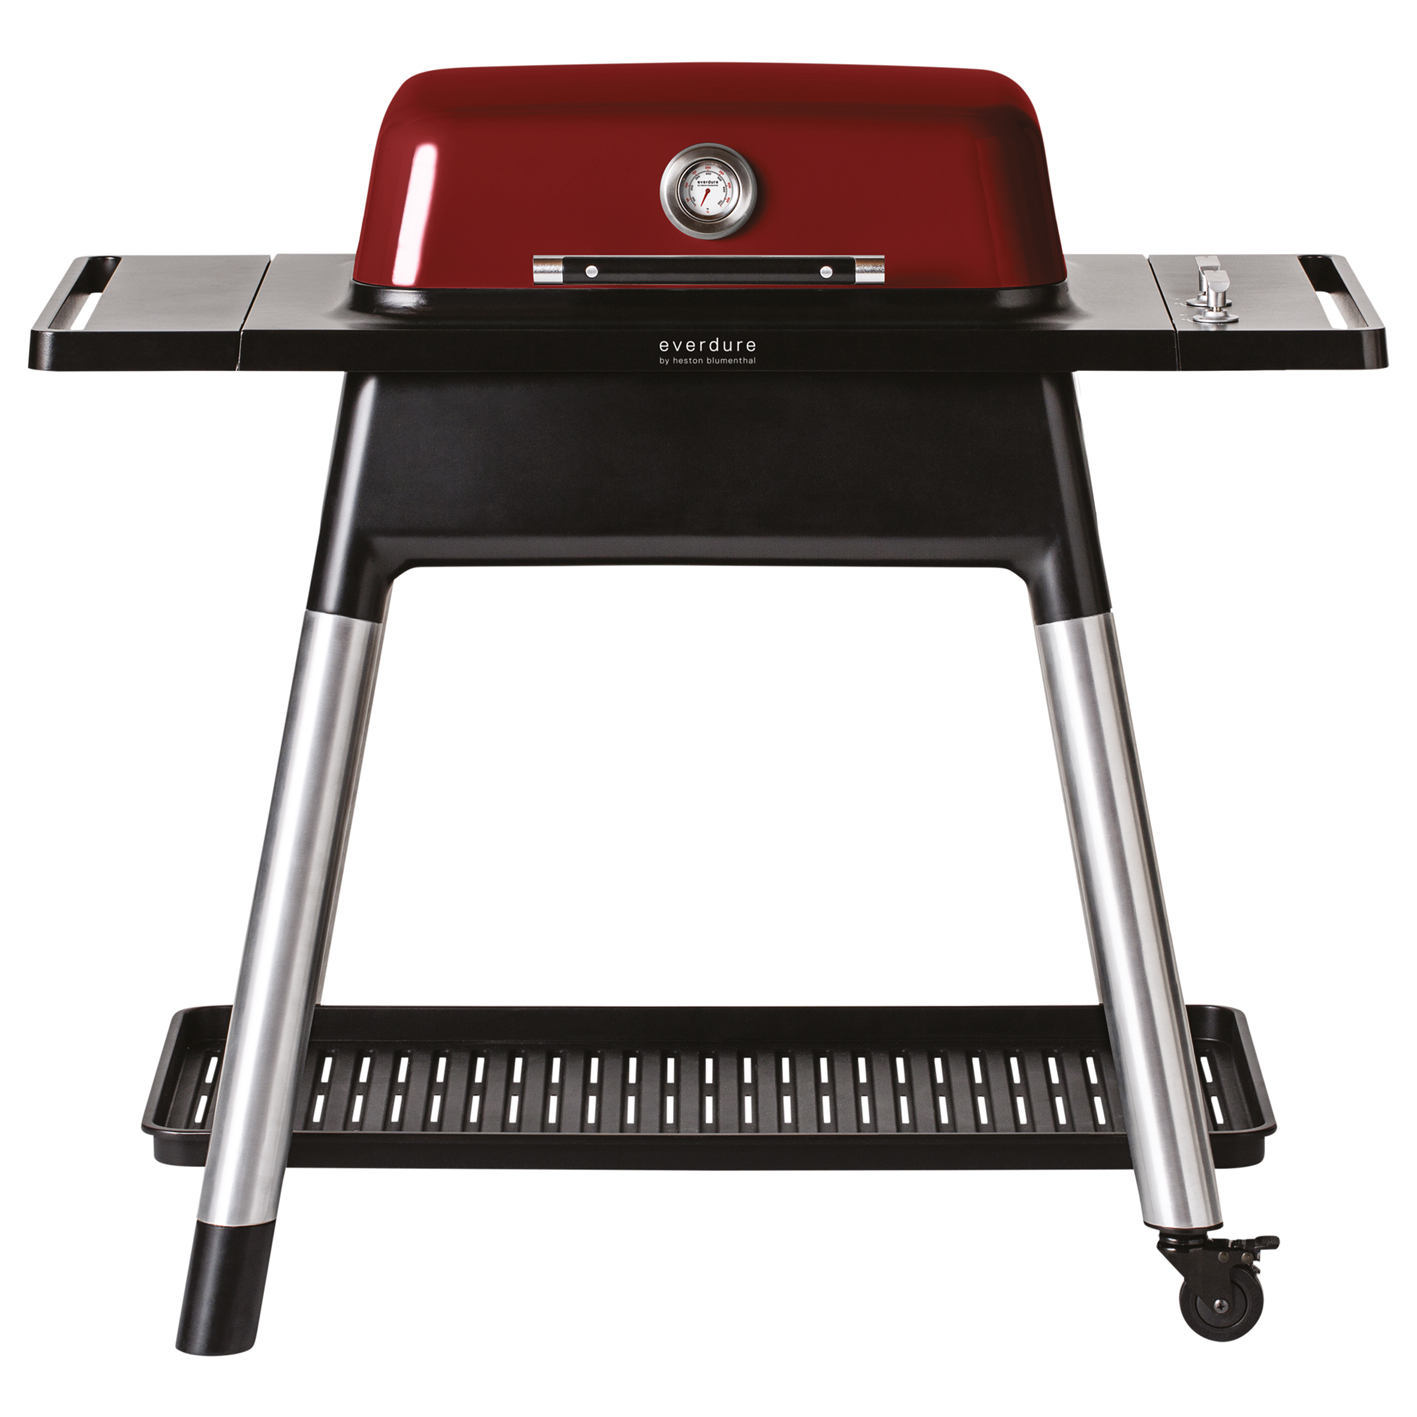 Everdure FORCE Gasgrill, Red Front